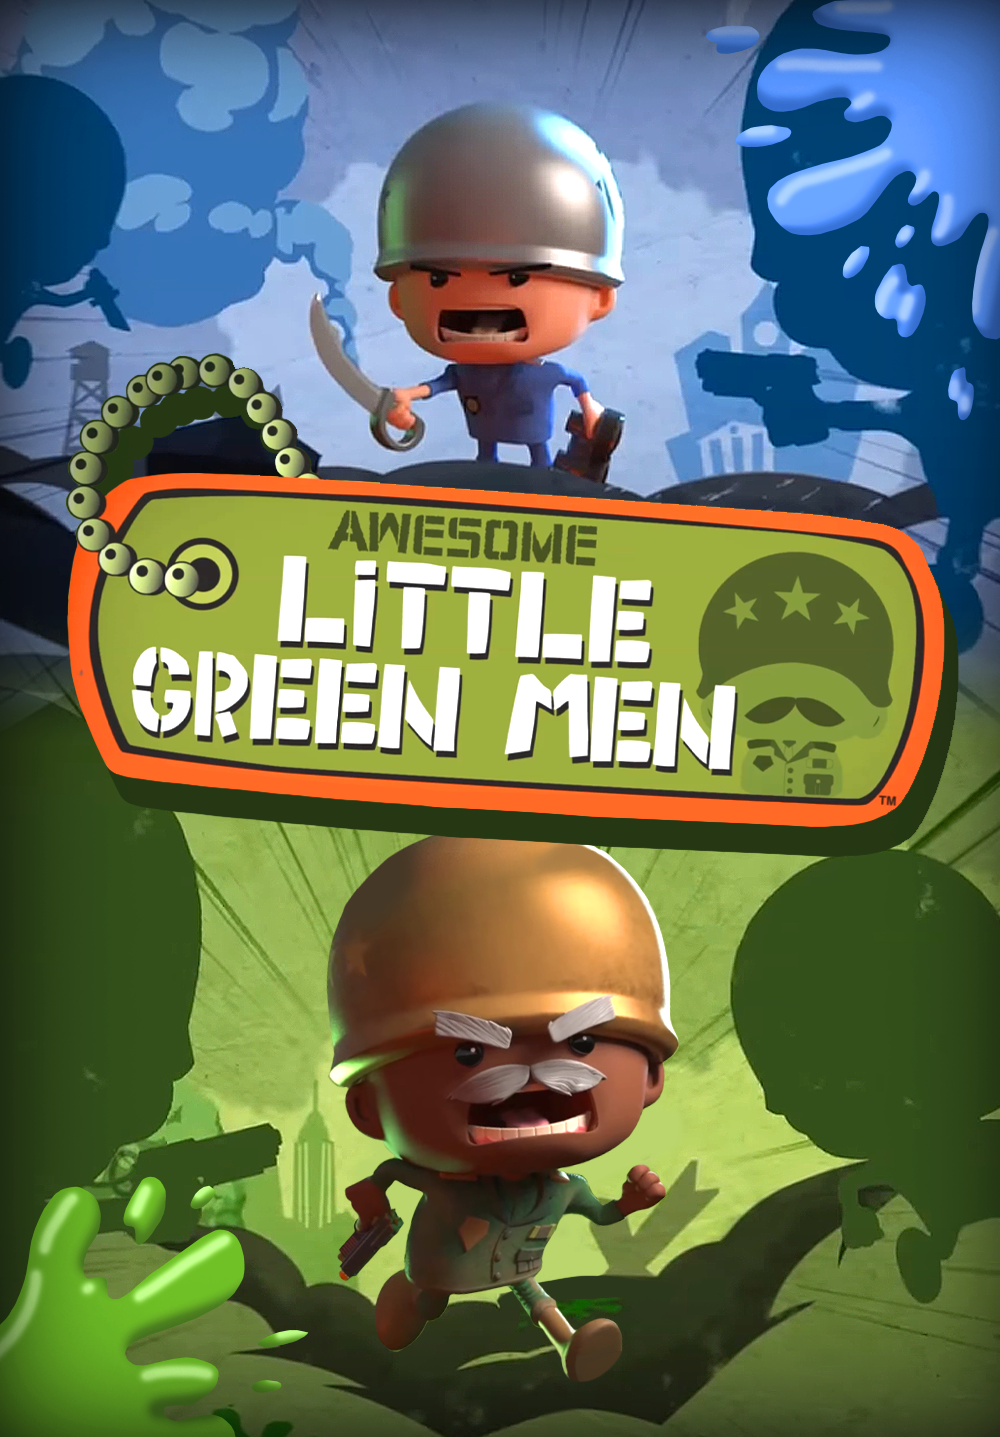 Awesome-green-little-men-poster